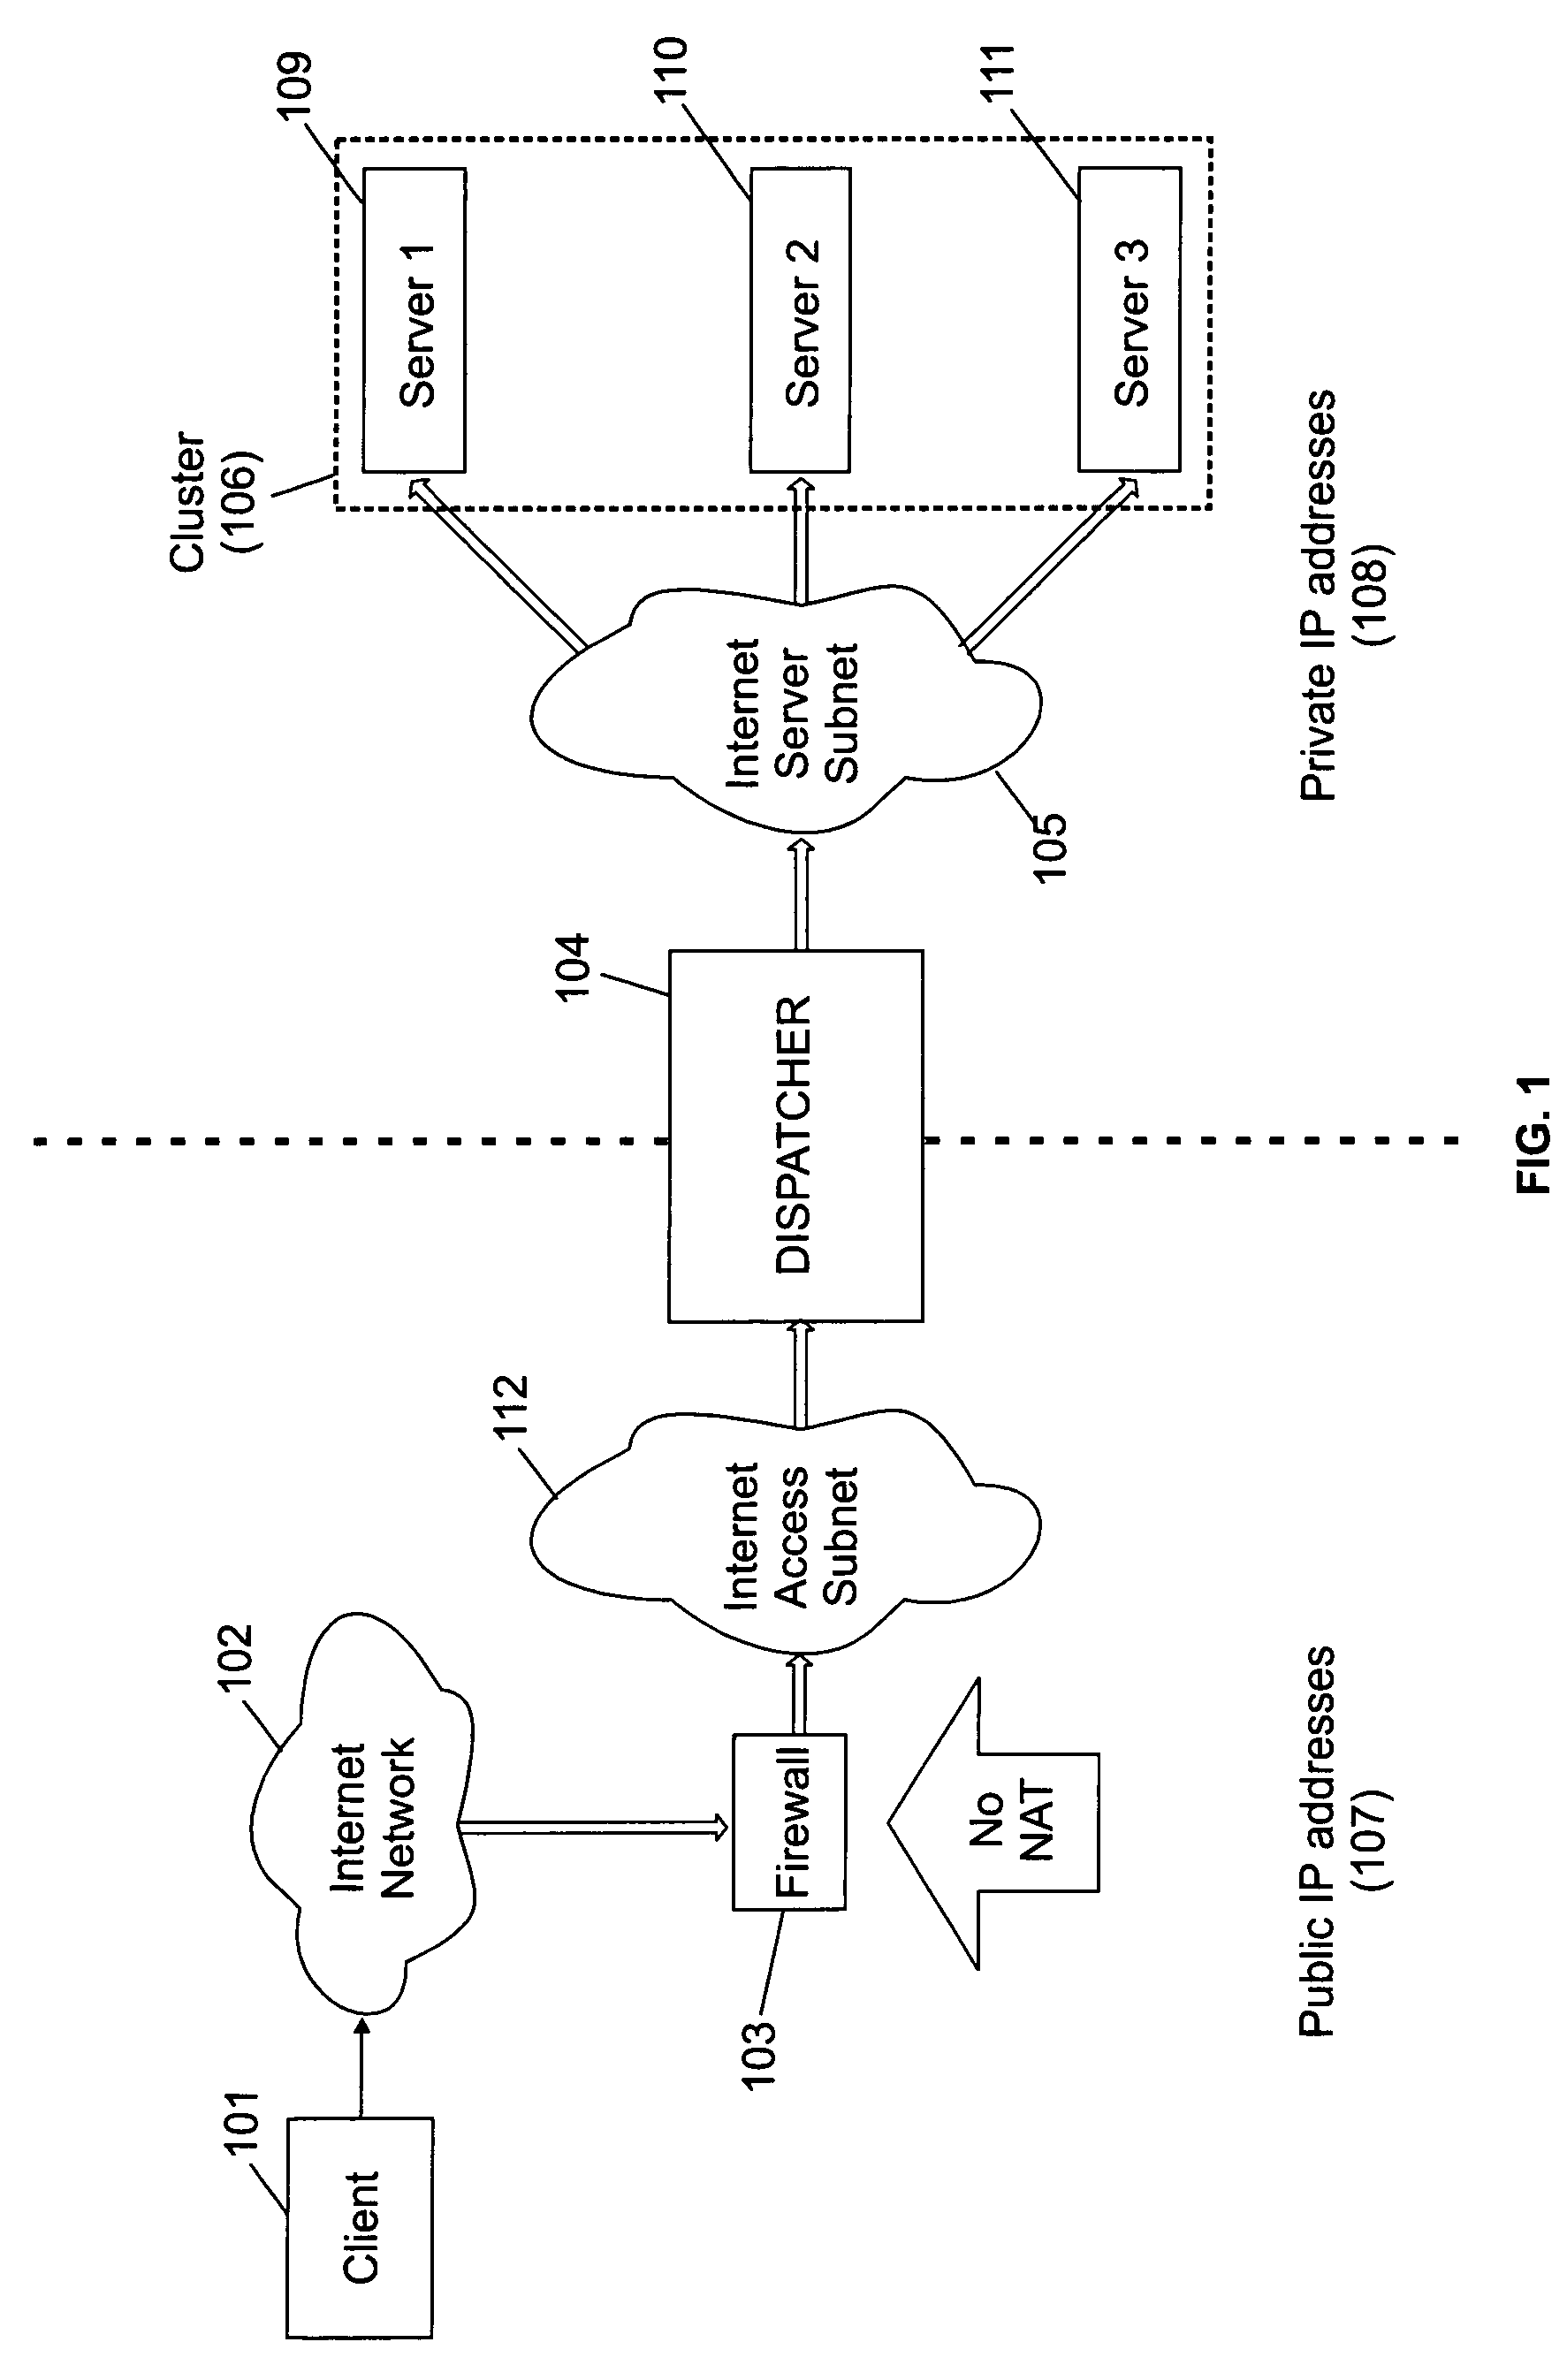 System and method for accessing clusters of servers from the internet network